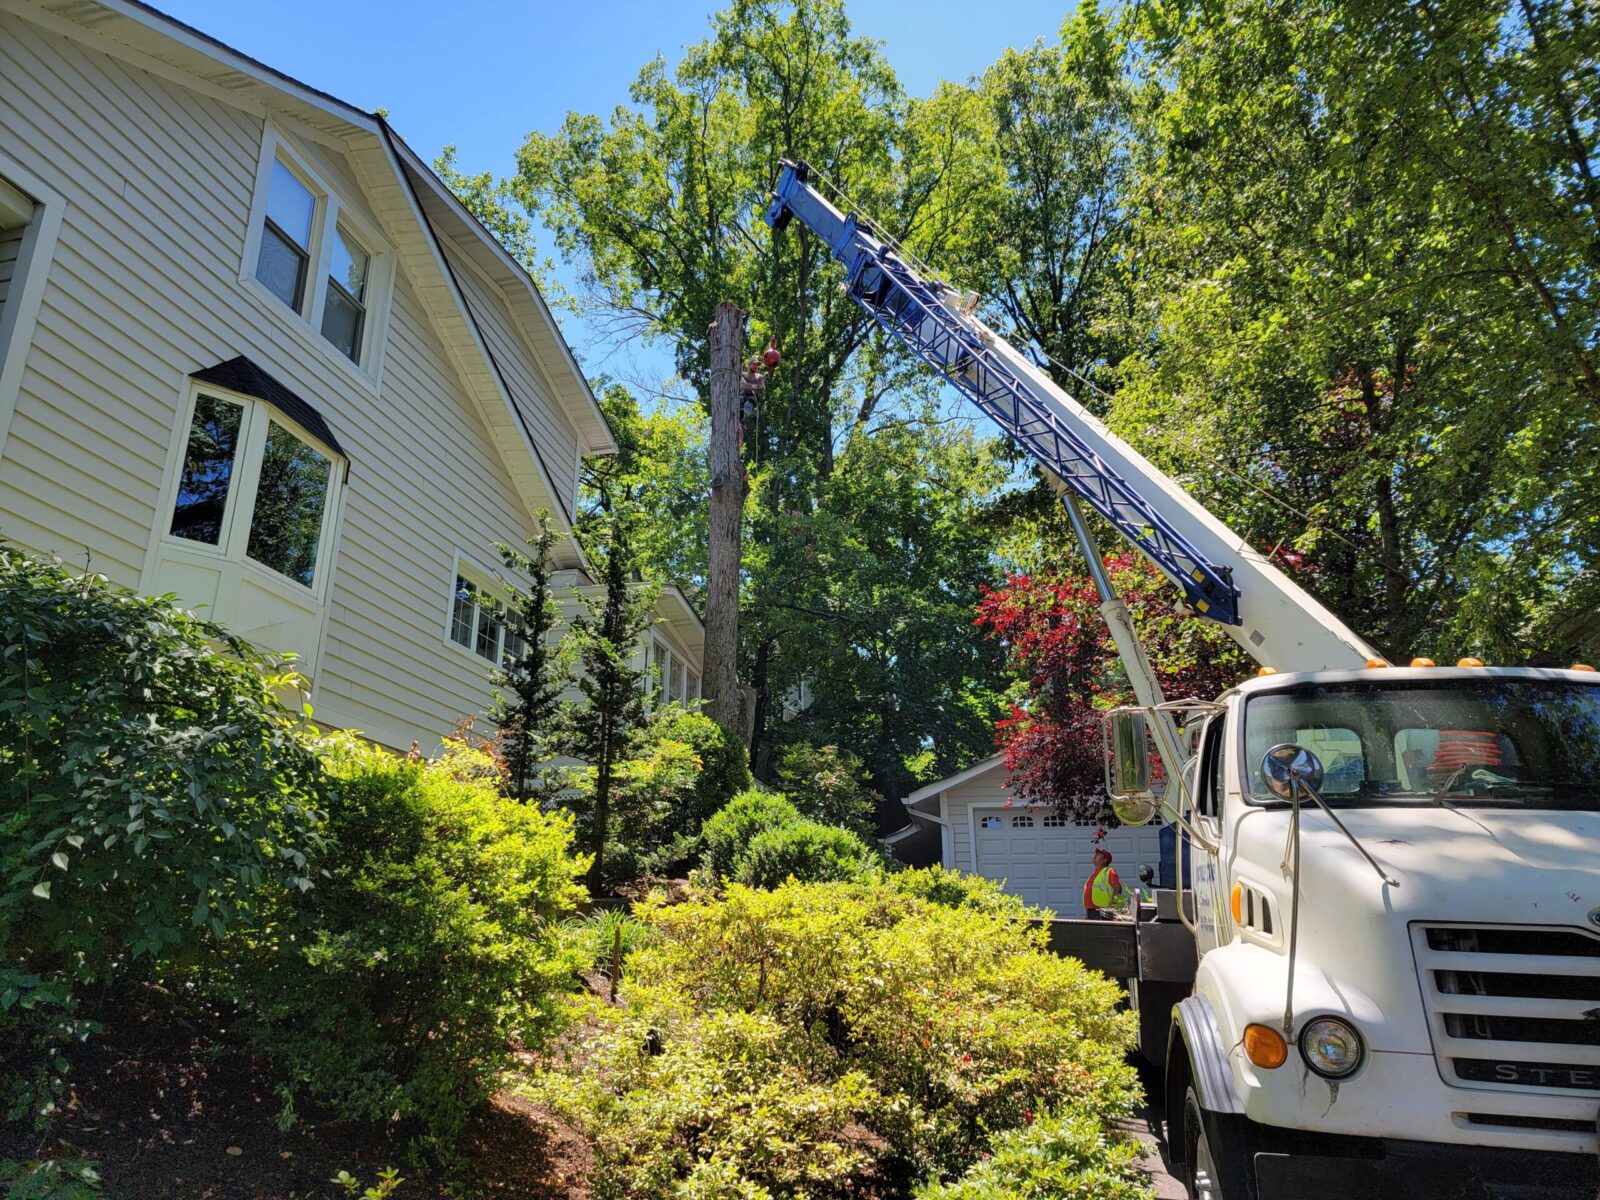 Common Equipment Used by Tree Service Professionals